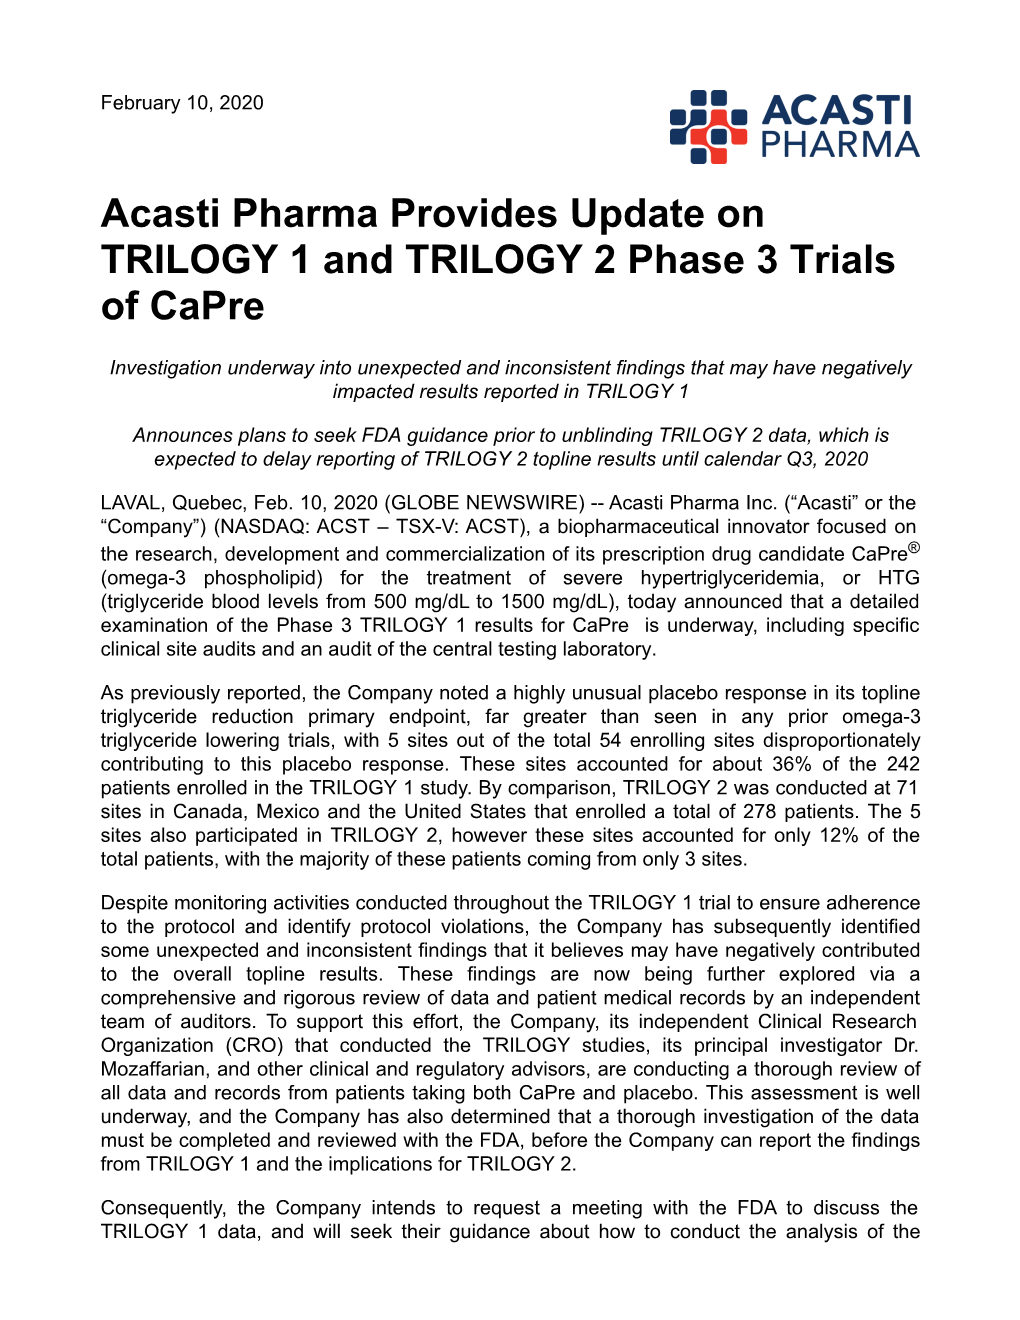 Acasti Pharma Provides Update on TRILOGY 1 and TRILOGY 2 Phase 3 Trials of Capre